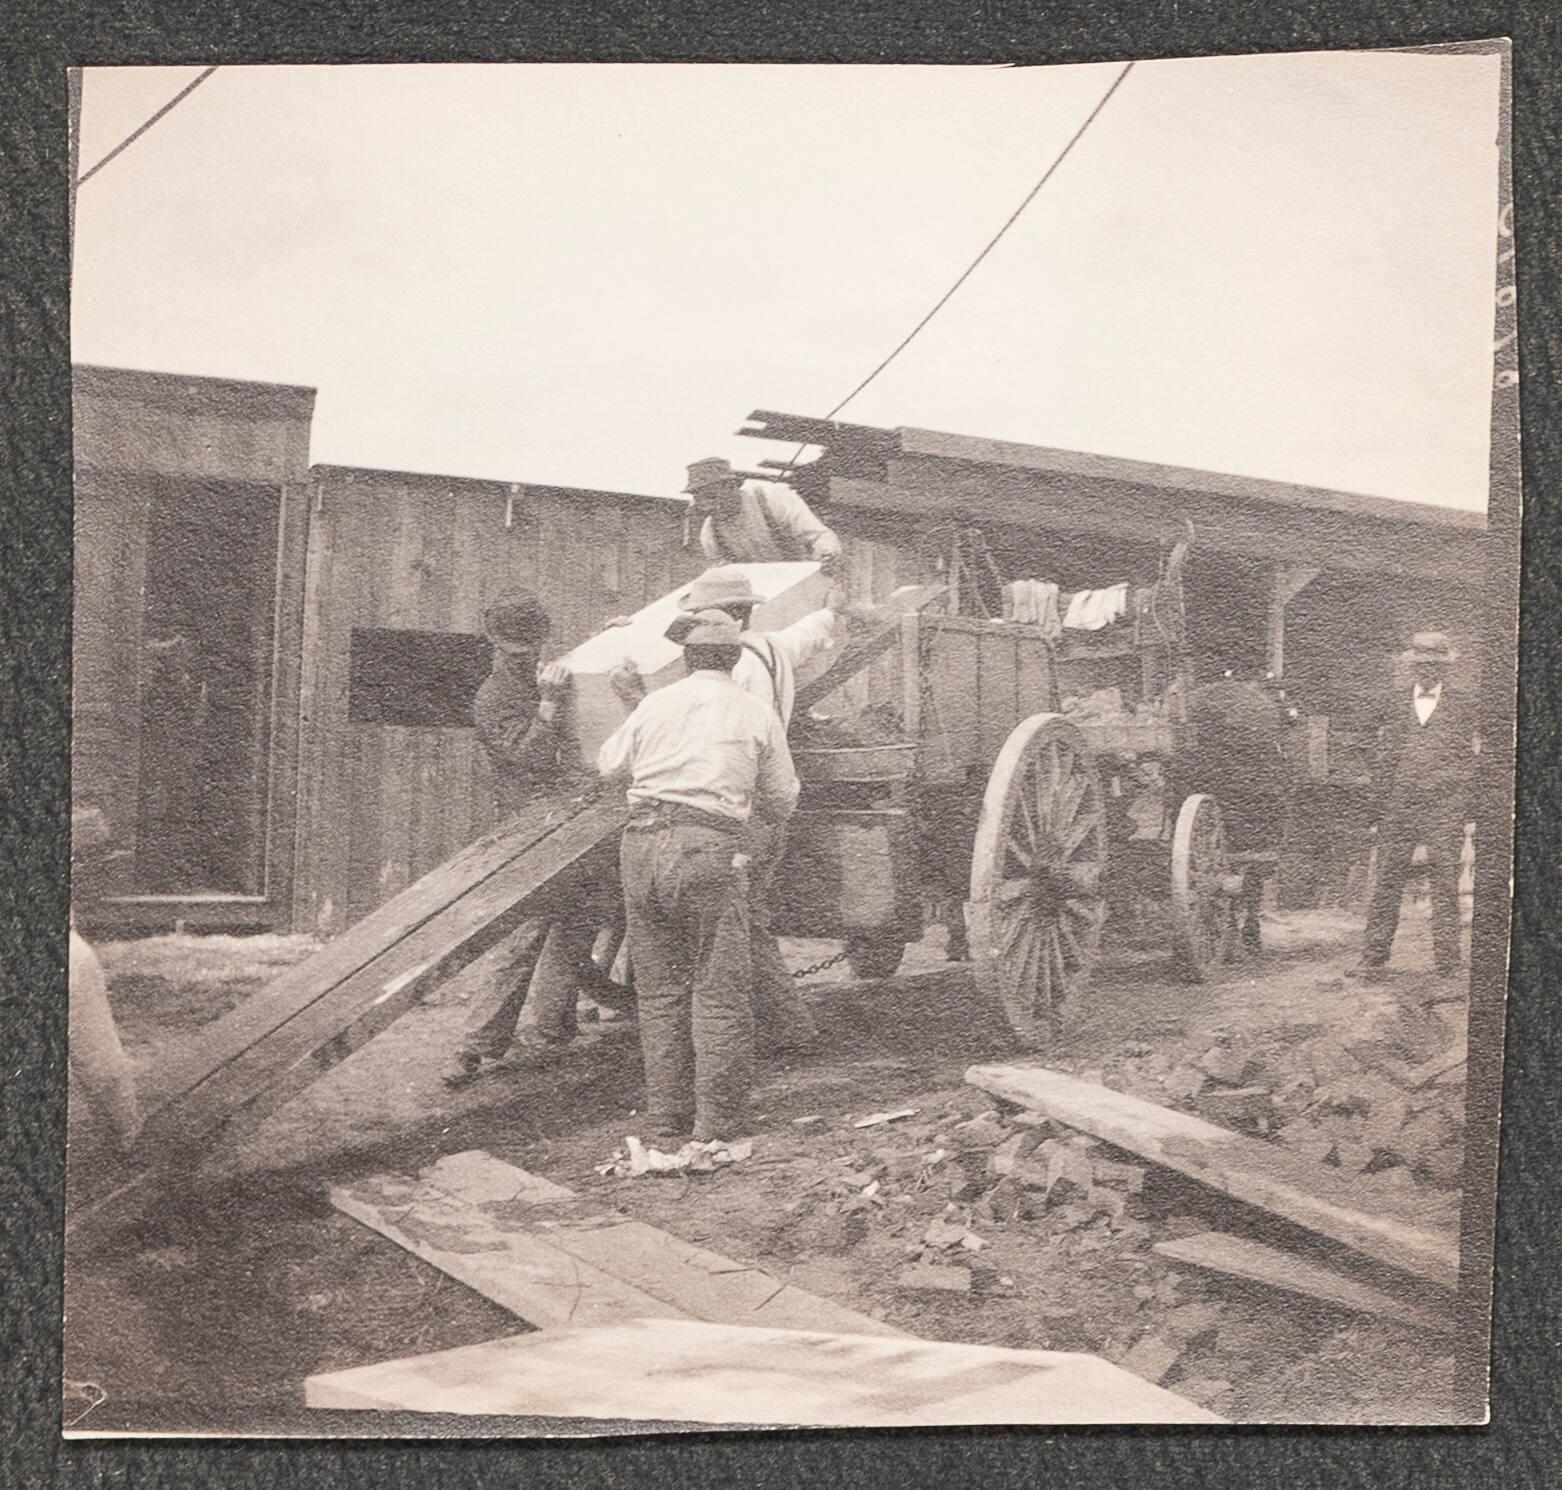 A black and white photograph of the Gardner Museum construction site with four workers loading an object onto a horse drawn carriage.